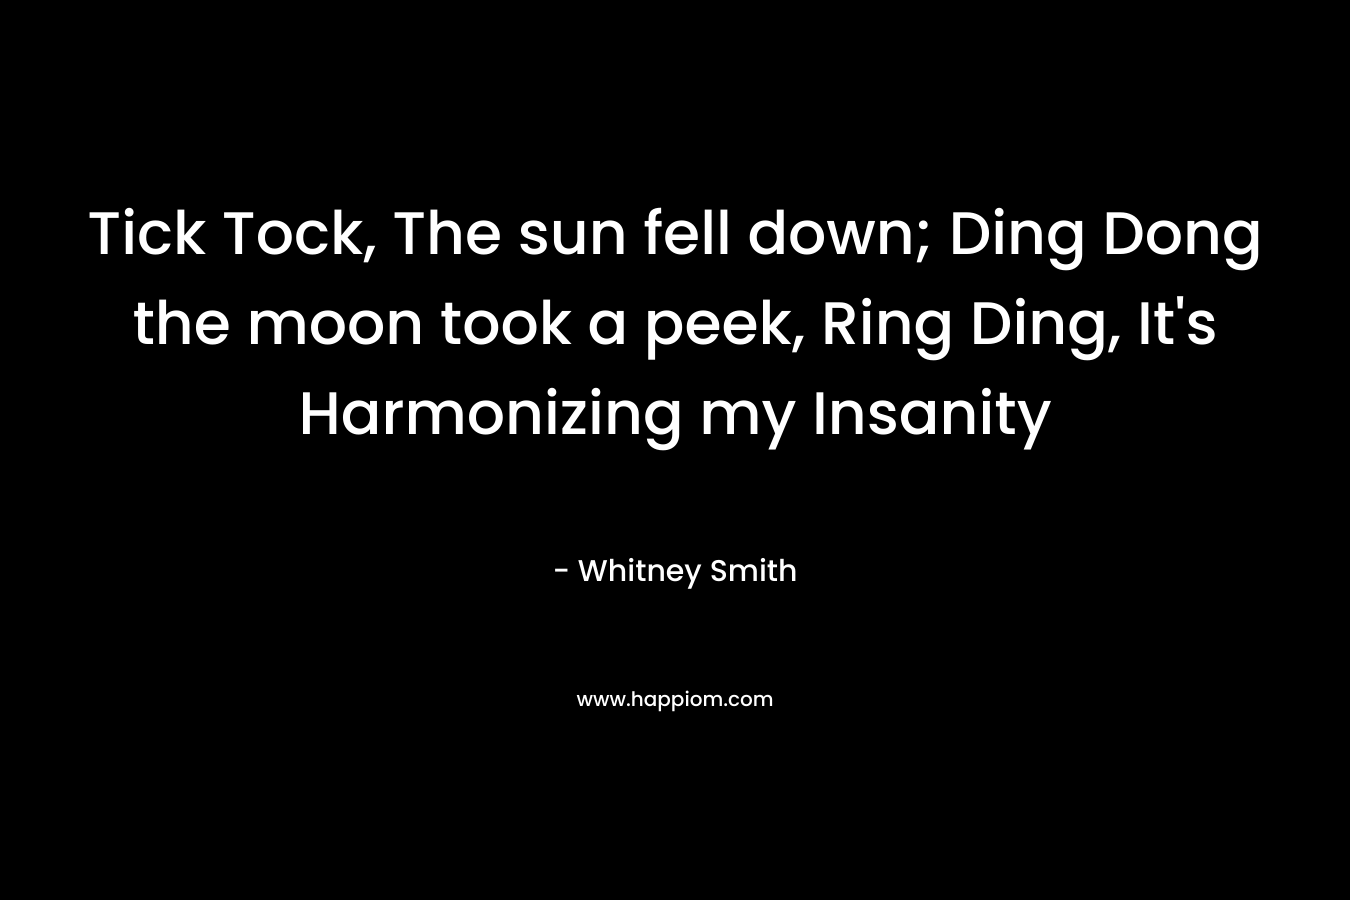 Tick Tock, The sun fell down; Ding Dong the moon took a peek, Ring Ding, It’s Harmonizing my Insanity – Whitney Smith